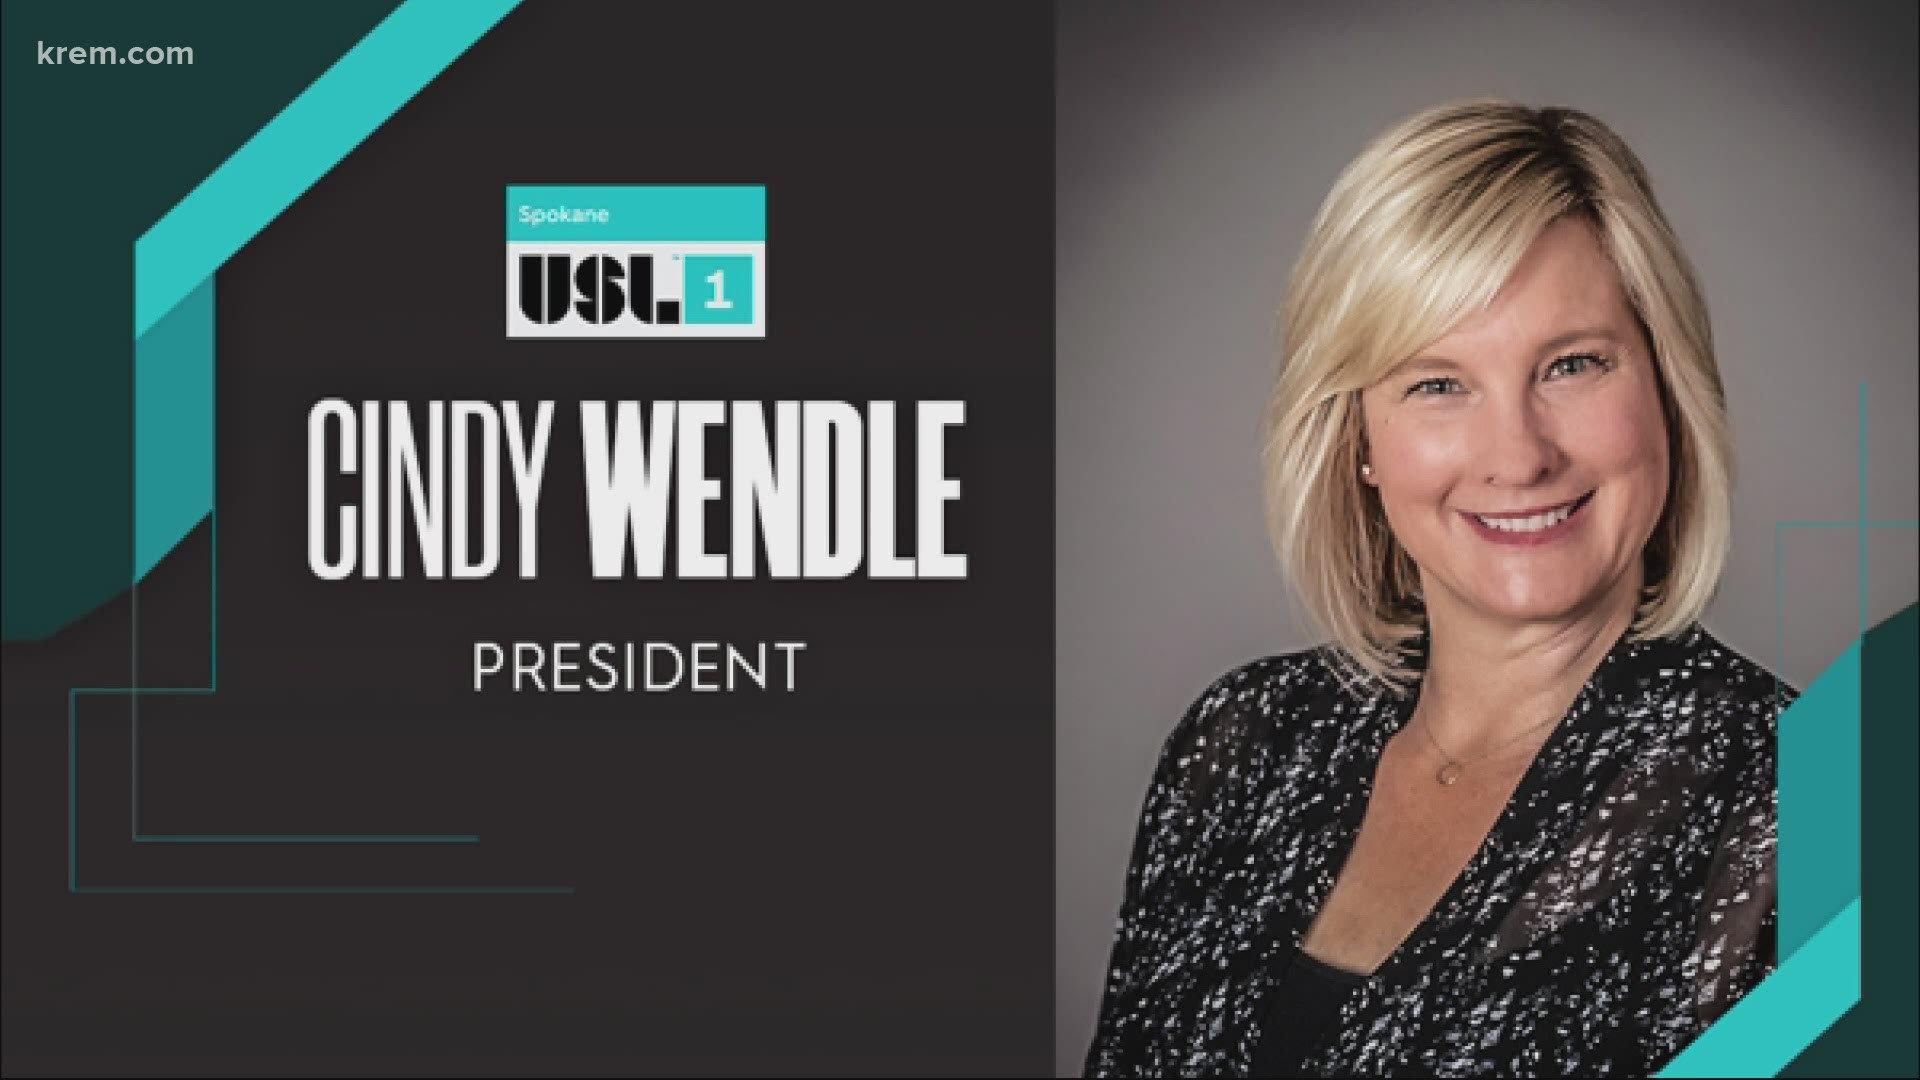 Cindy Wendle will prepare for the day-to-day operations to prepare for the 2023 inaugural season.